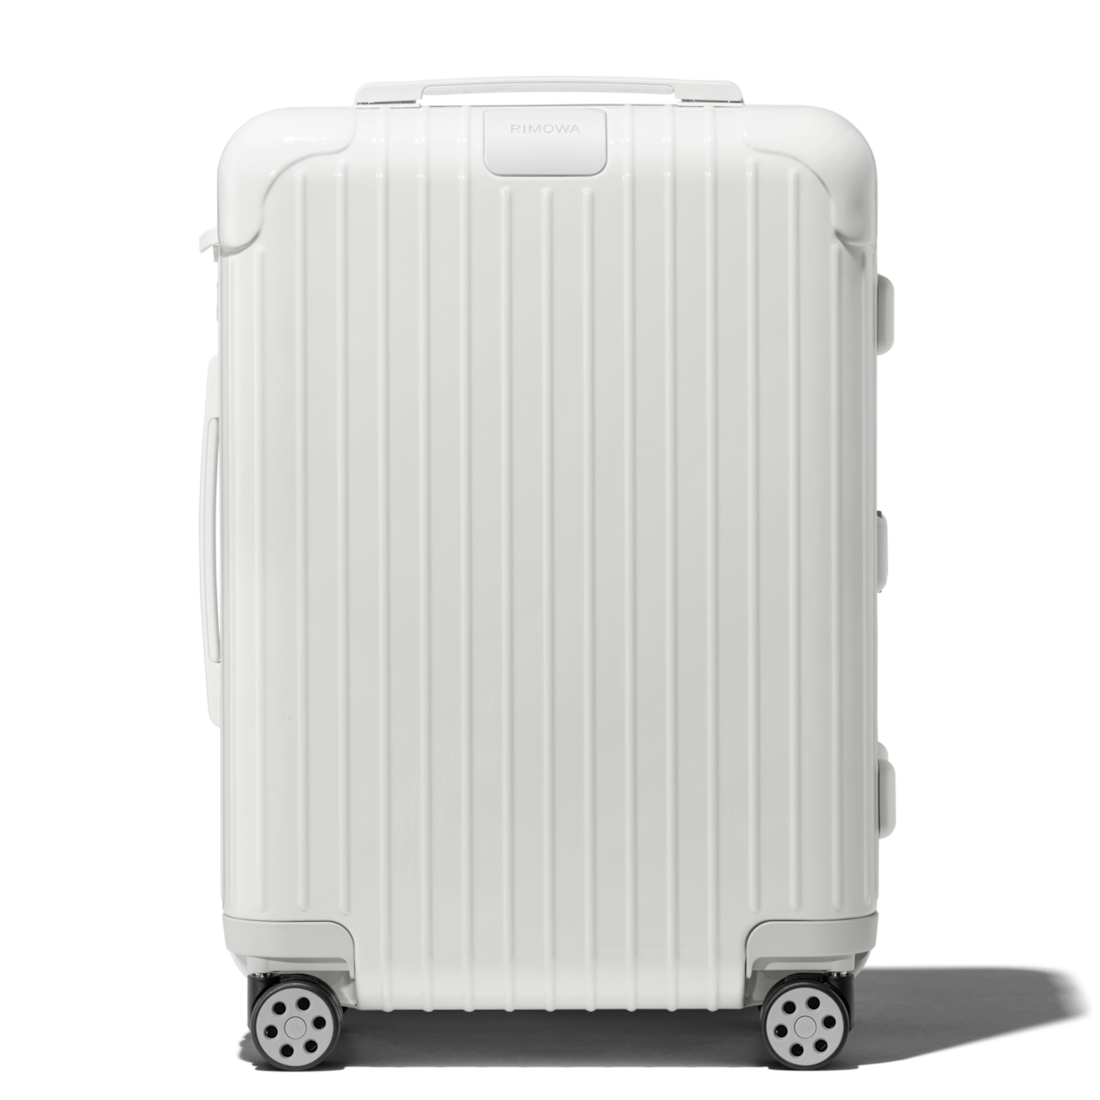 rimowa carry on suitcase